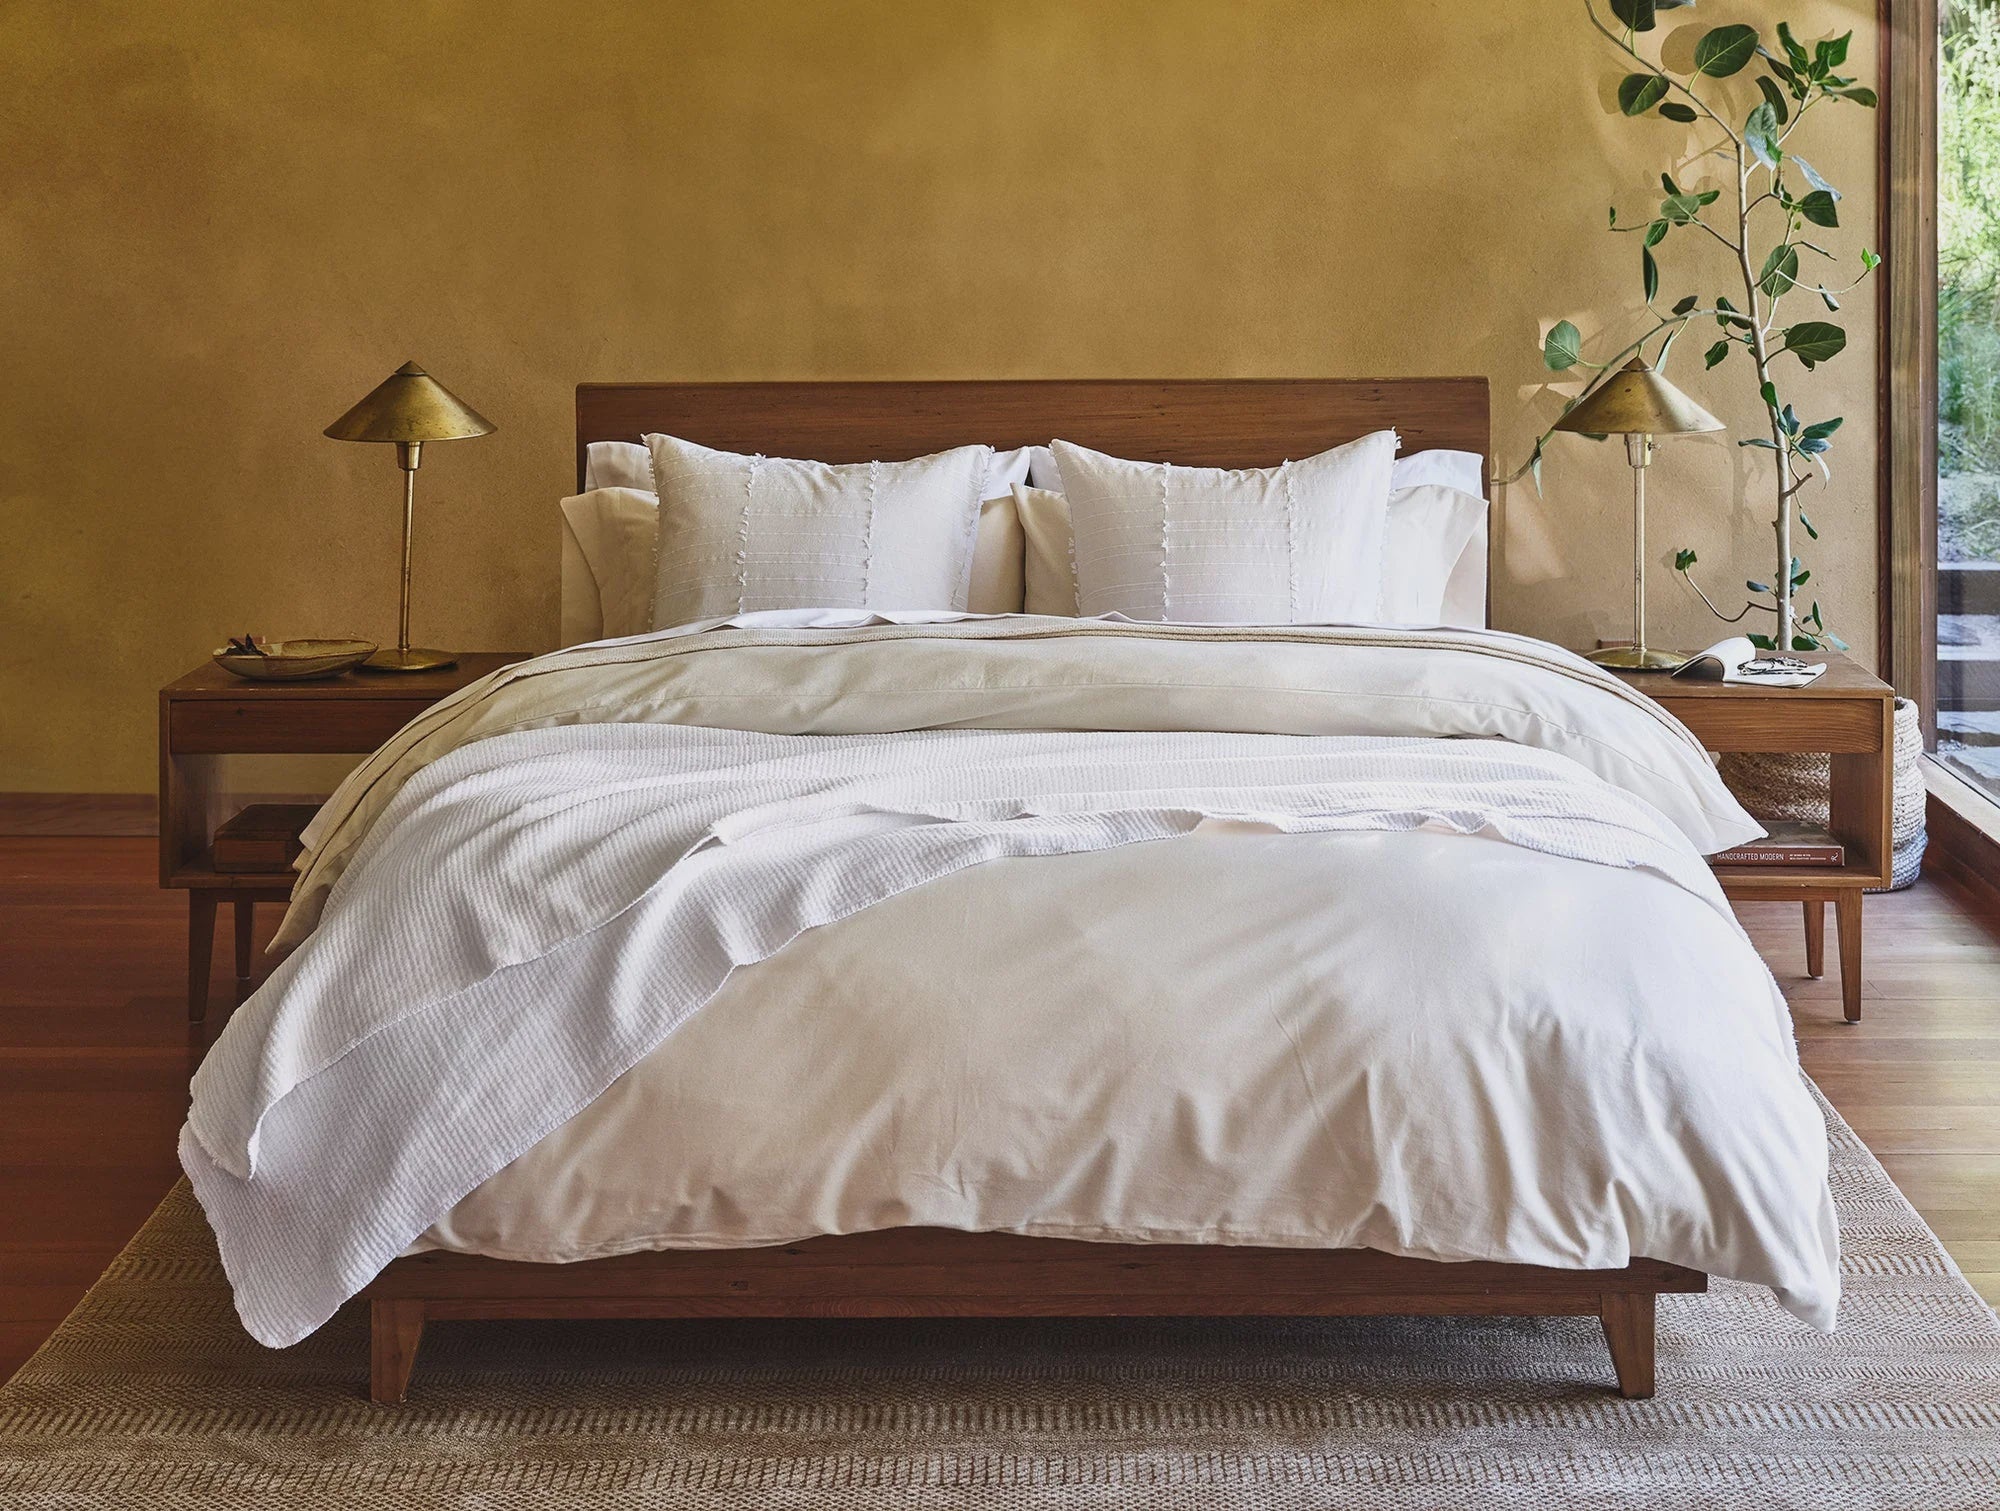 A neatly made wooden bed with crisp white Coyuchi Inc bedding, flanked by matching side tables with lamps and books, set against a textured ocher wall in a Scottsdale, Arizona bungalow, with a potted green plant to the side.